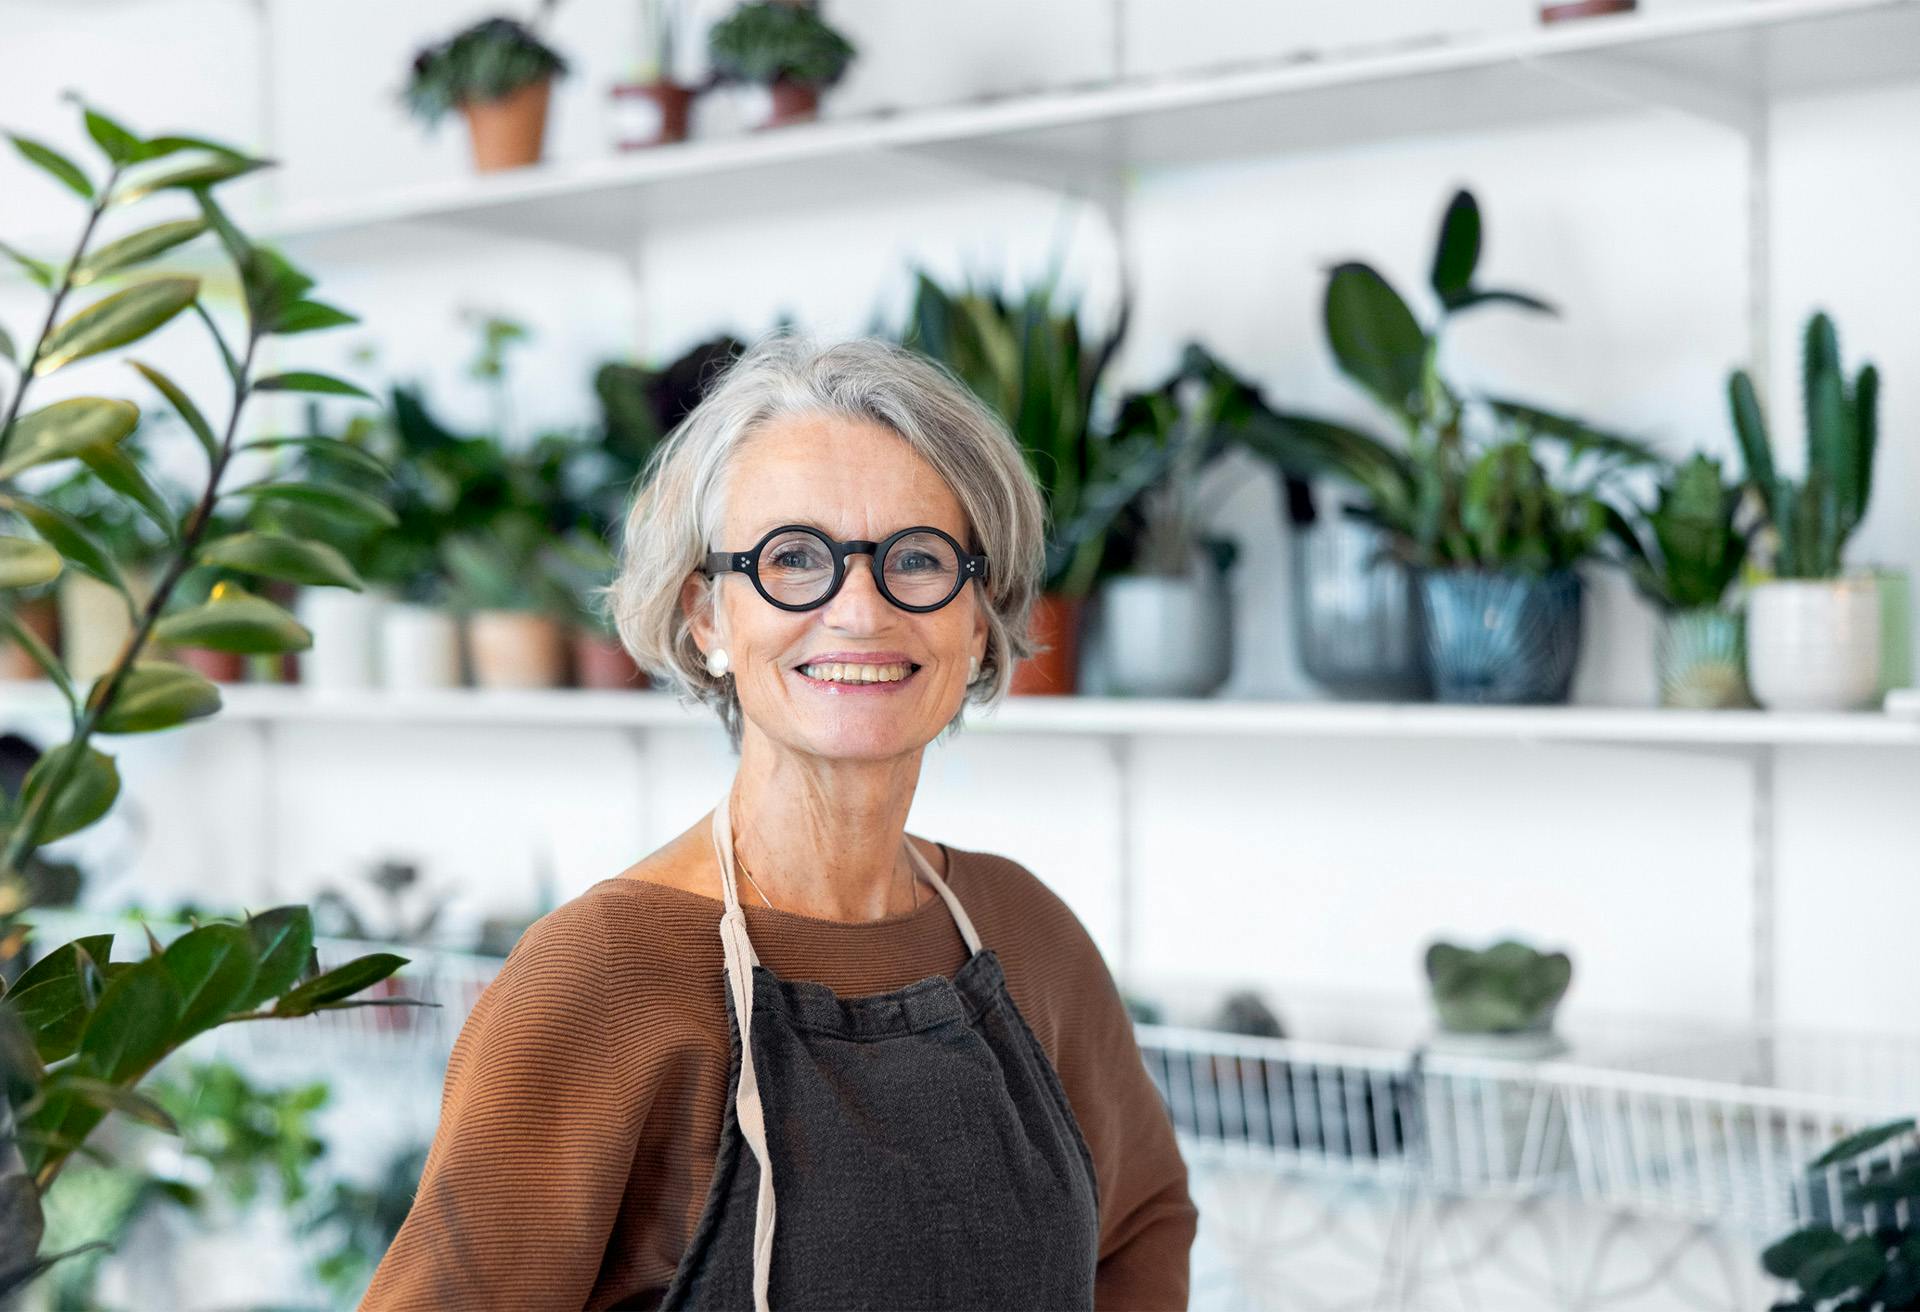 smiling woman in glasses standing in front of a shelf of plants